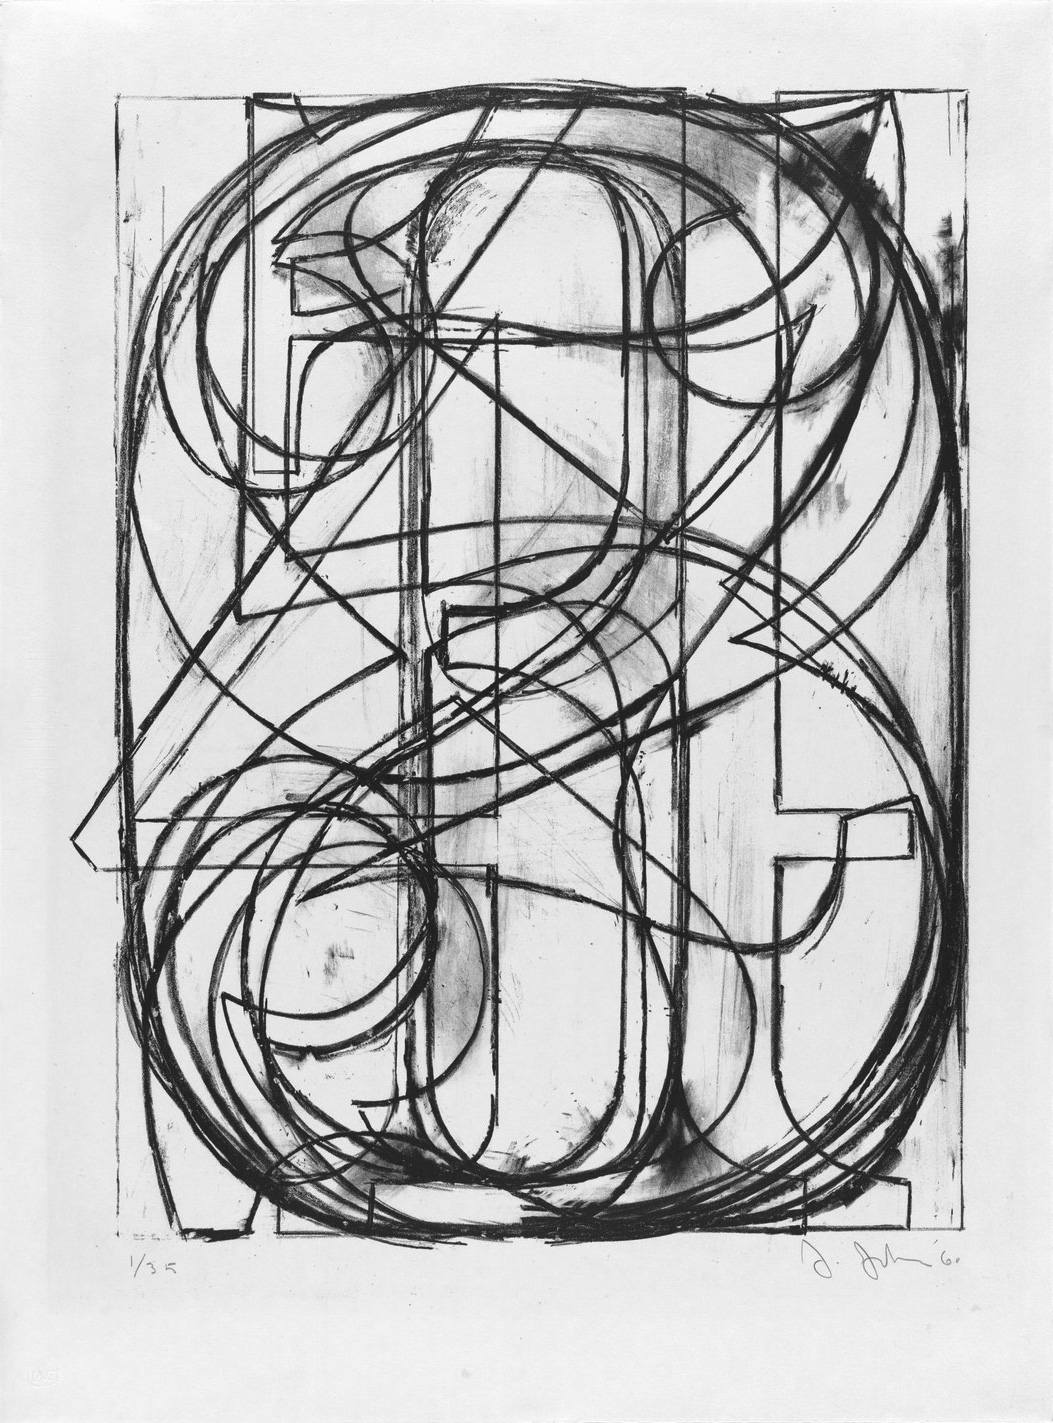 A lithograph of the numerals zero through nine, hand-drawn and superimposed on top of each other